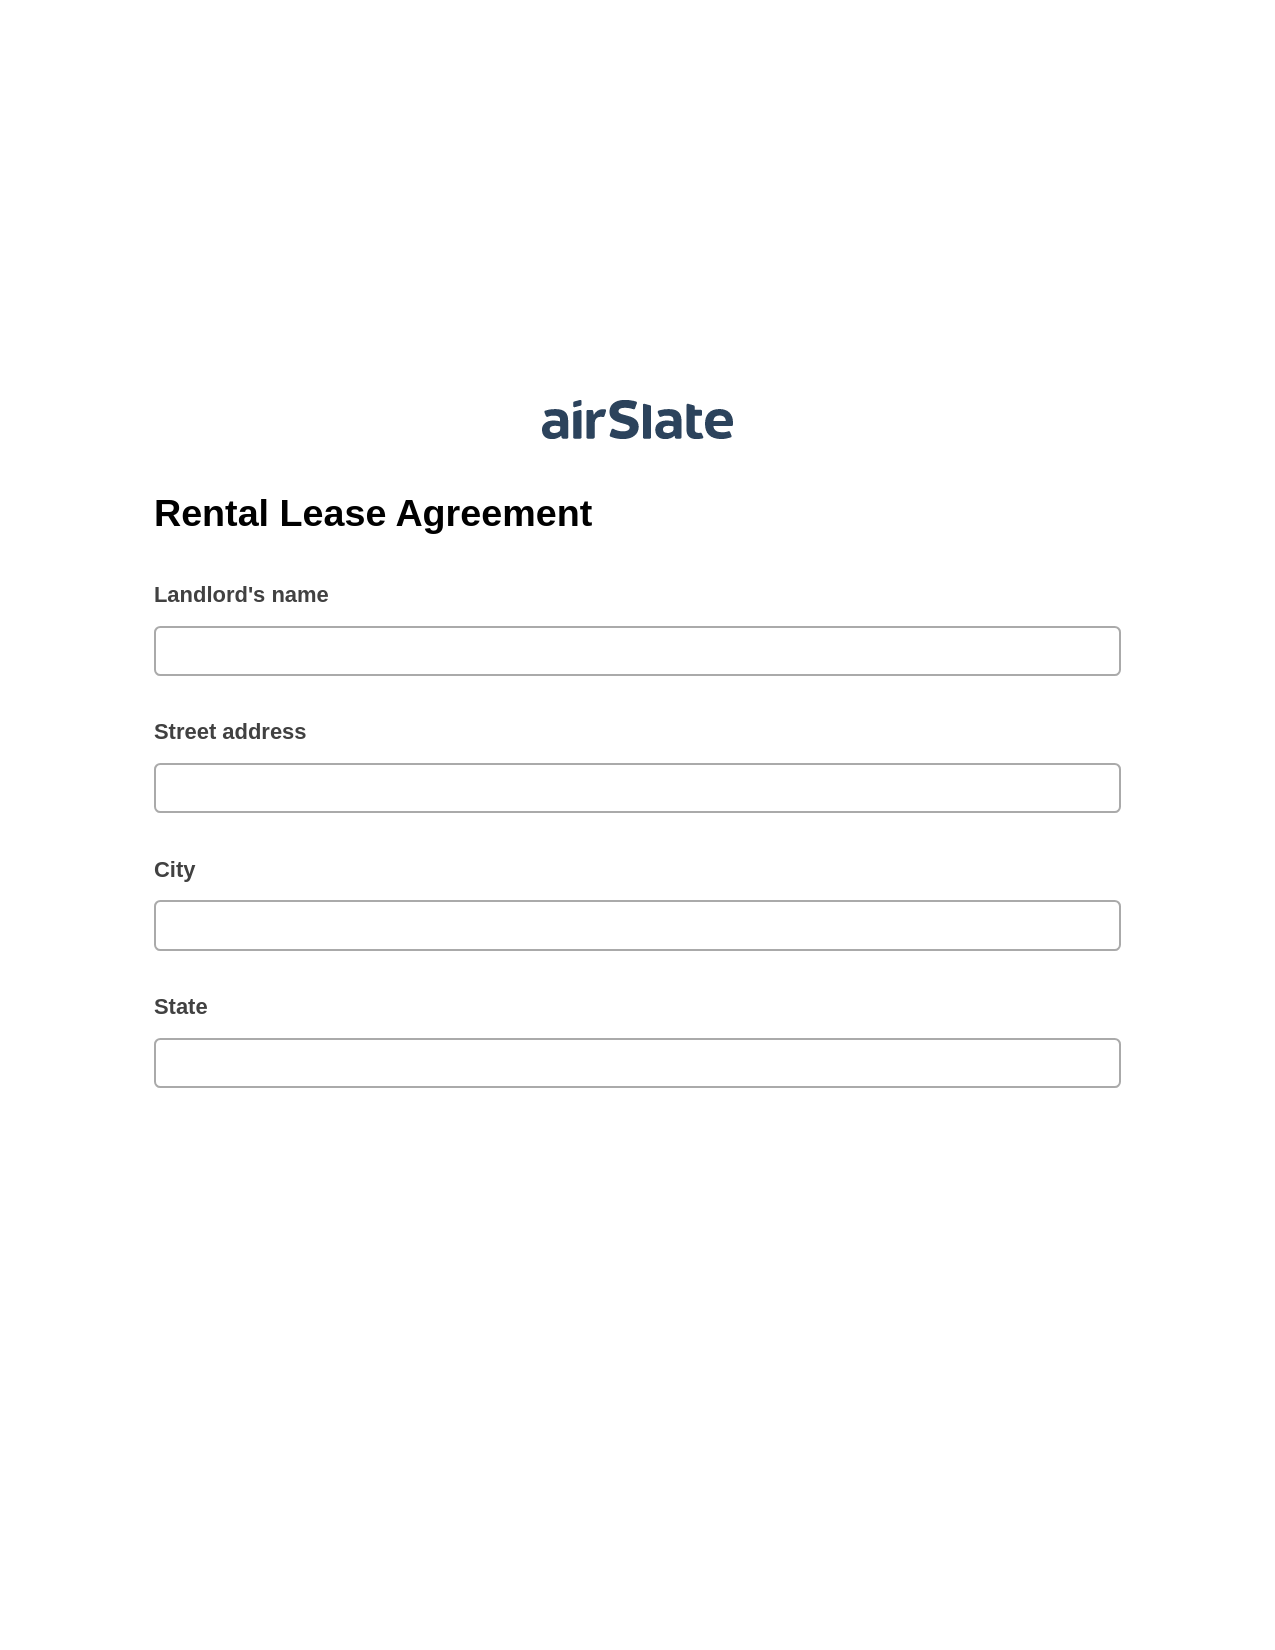 Multirole Rental Lease Agreement Pre-fill from Salesforce Records with SOQL Bot, Invoke Salesforce Process Bot, Export to Excel 365 Bot